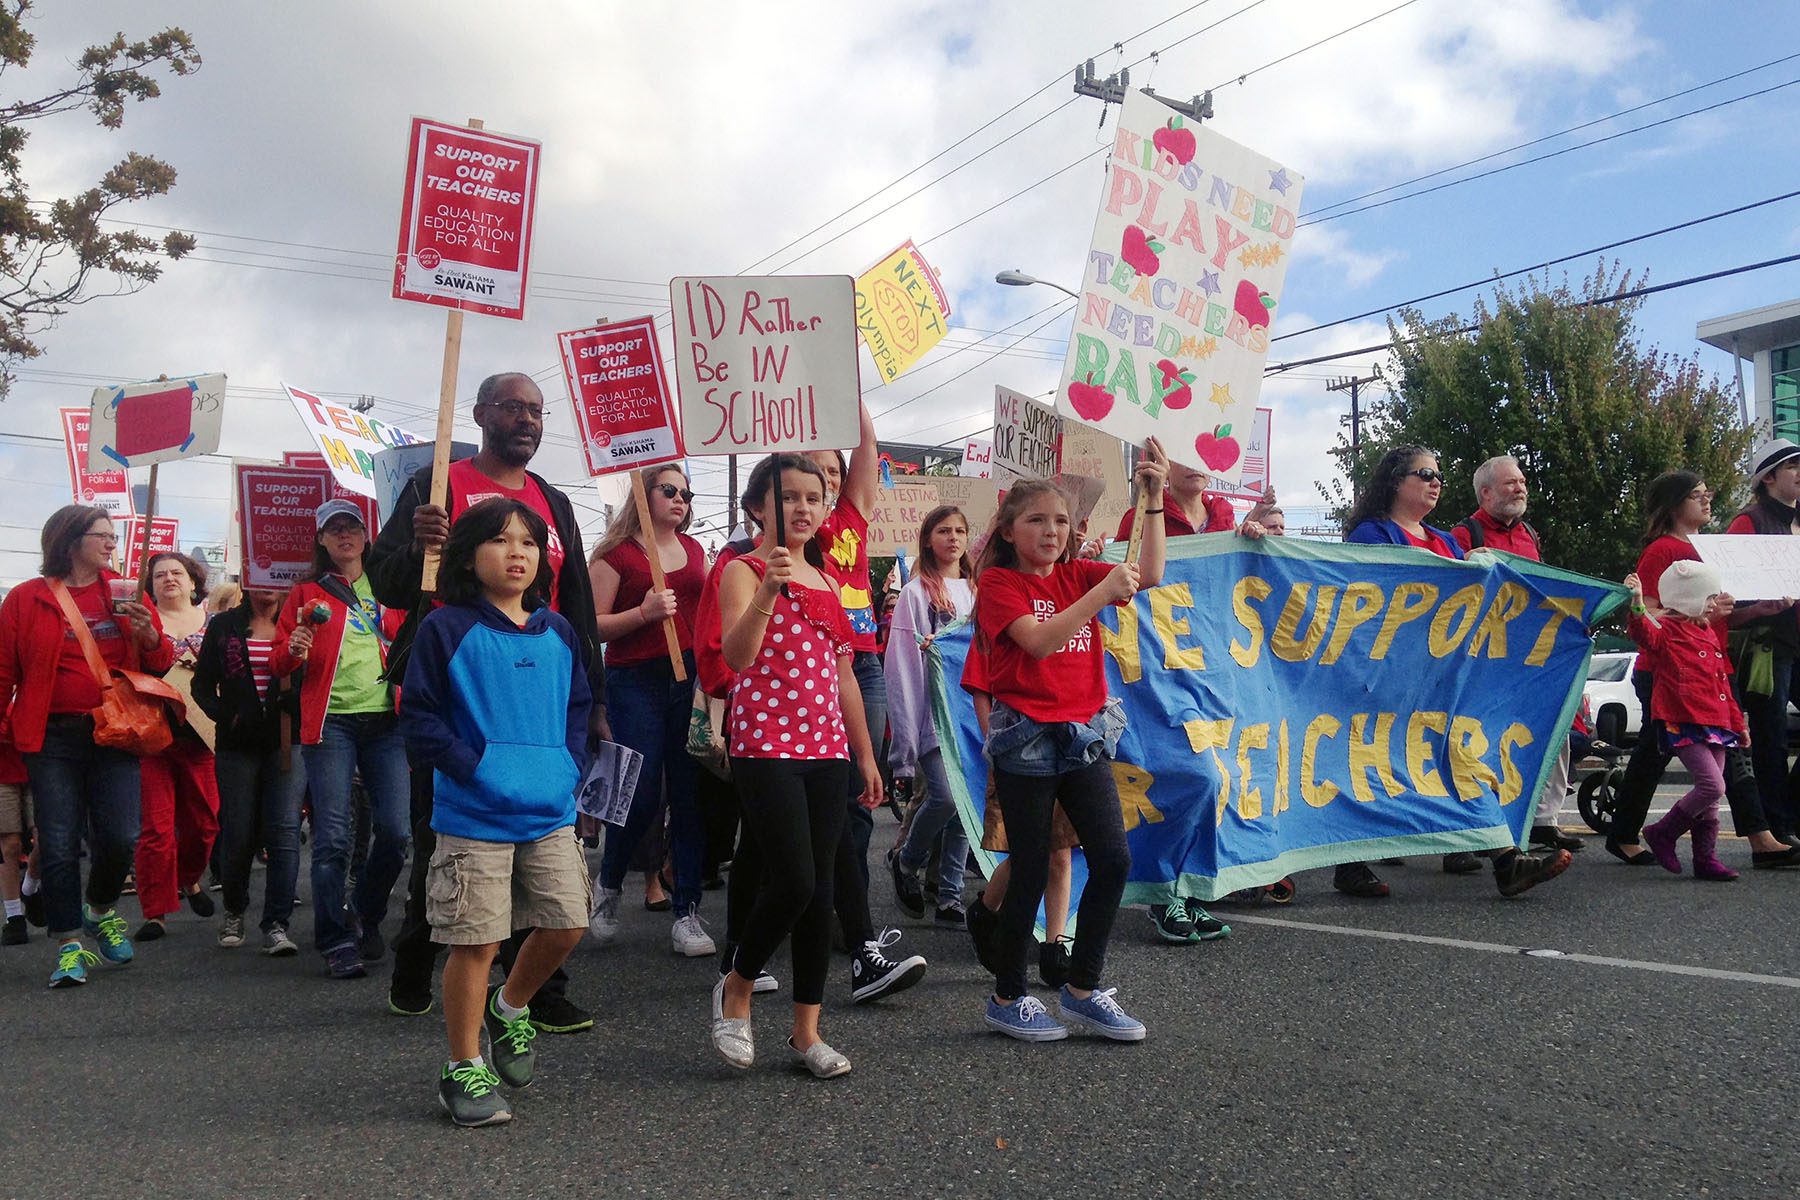 Supporters of striking Seattle teachers take part in a march in downtown Seattle.